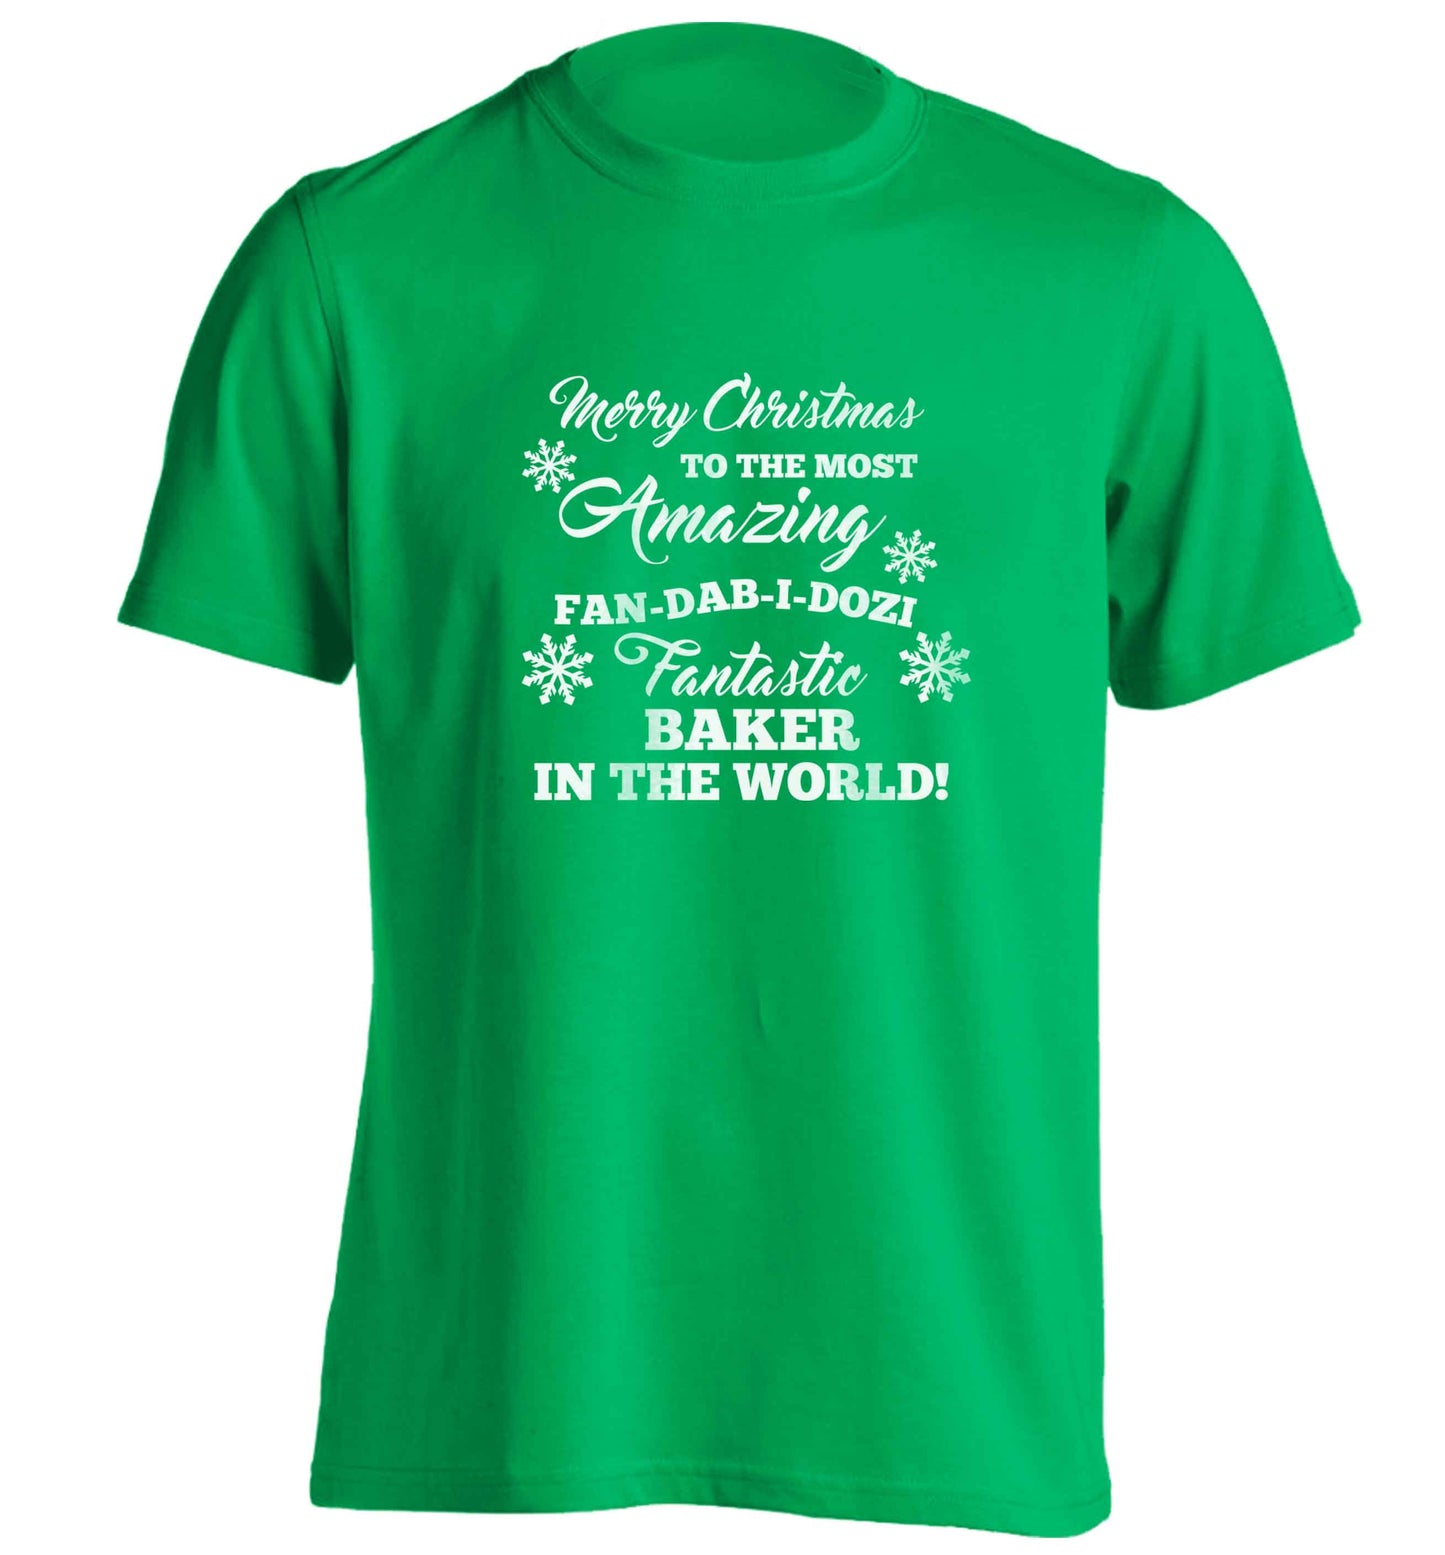 Merry Christmas to the most amazing baker in the world! adults unisex green Tshirt 2XL